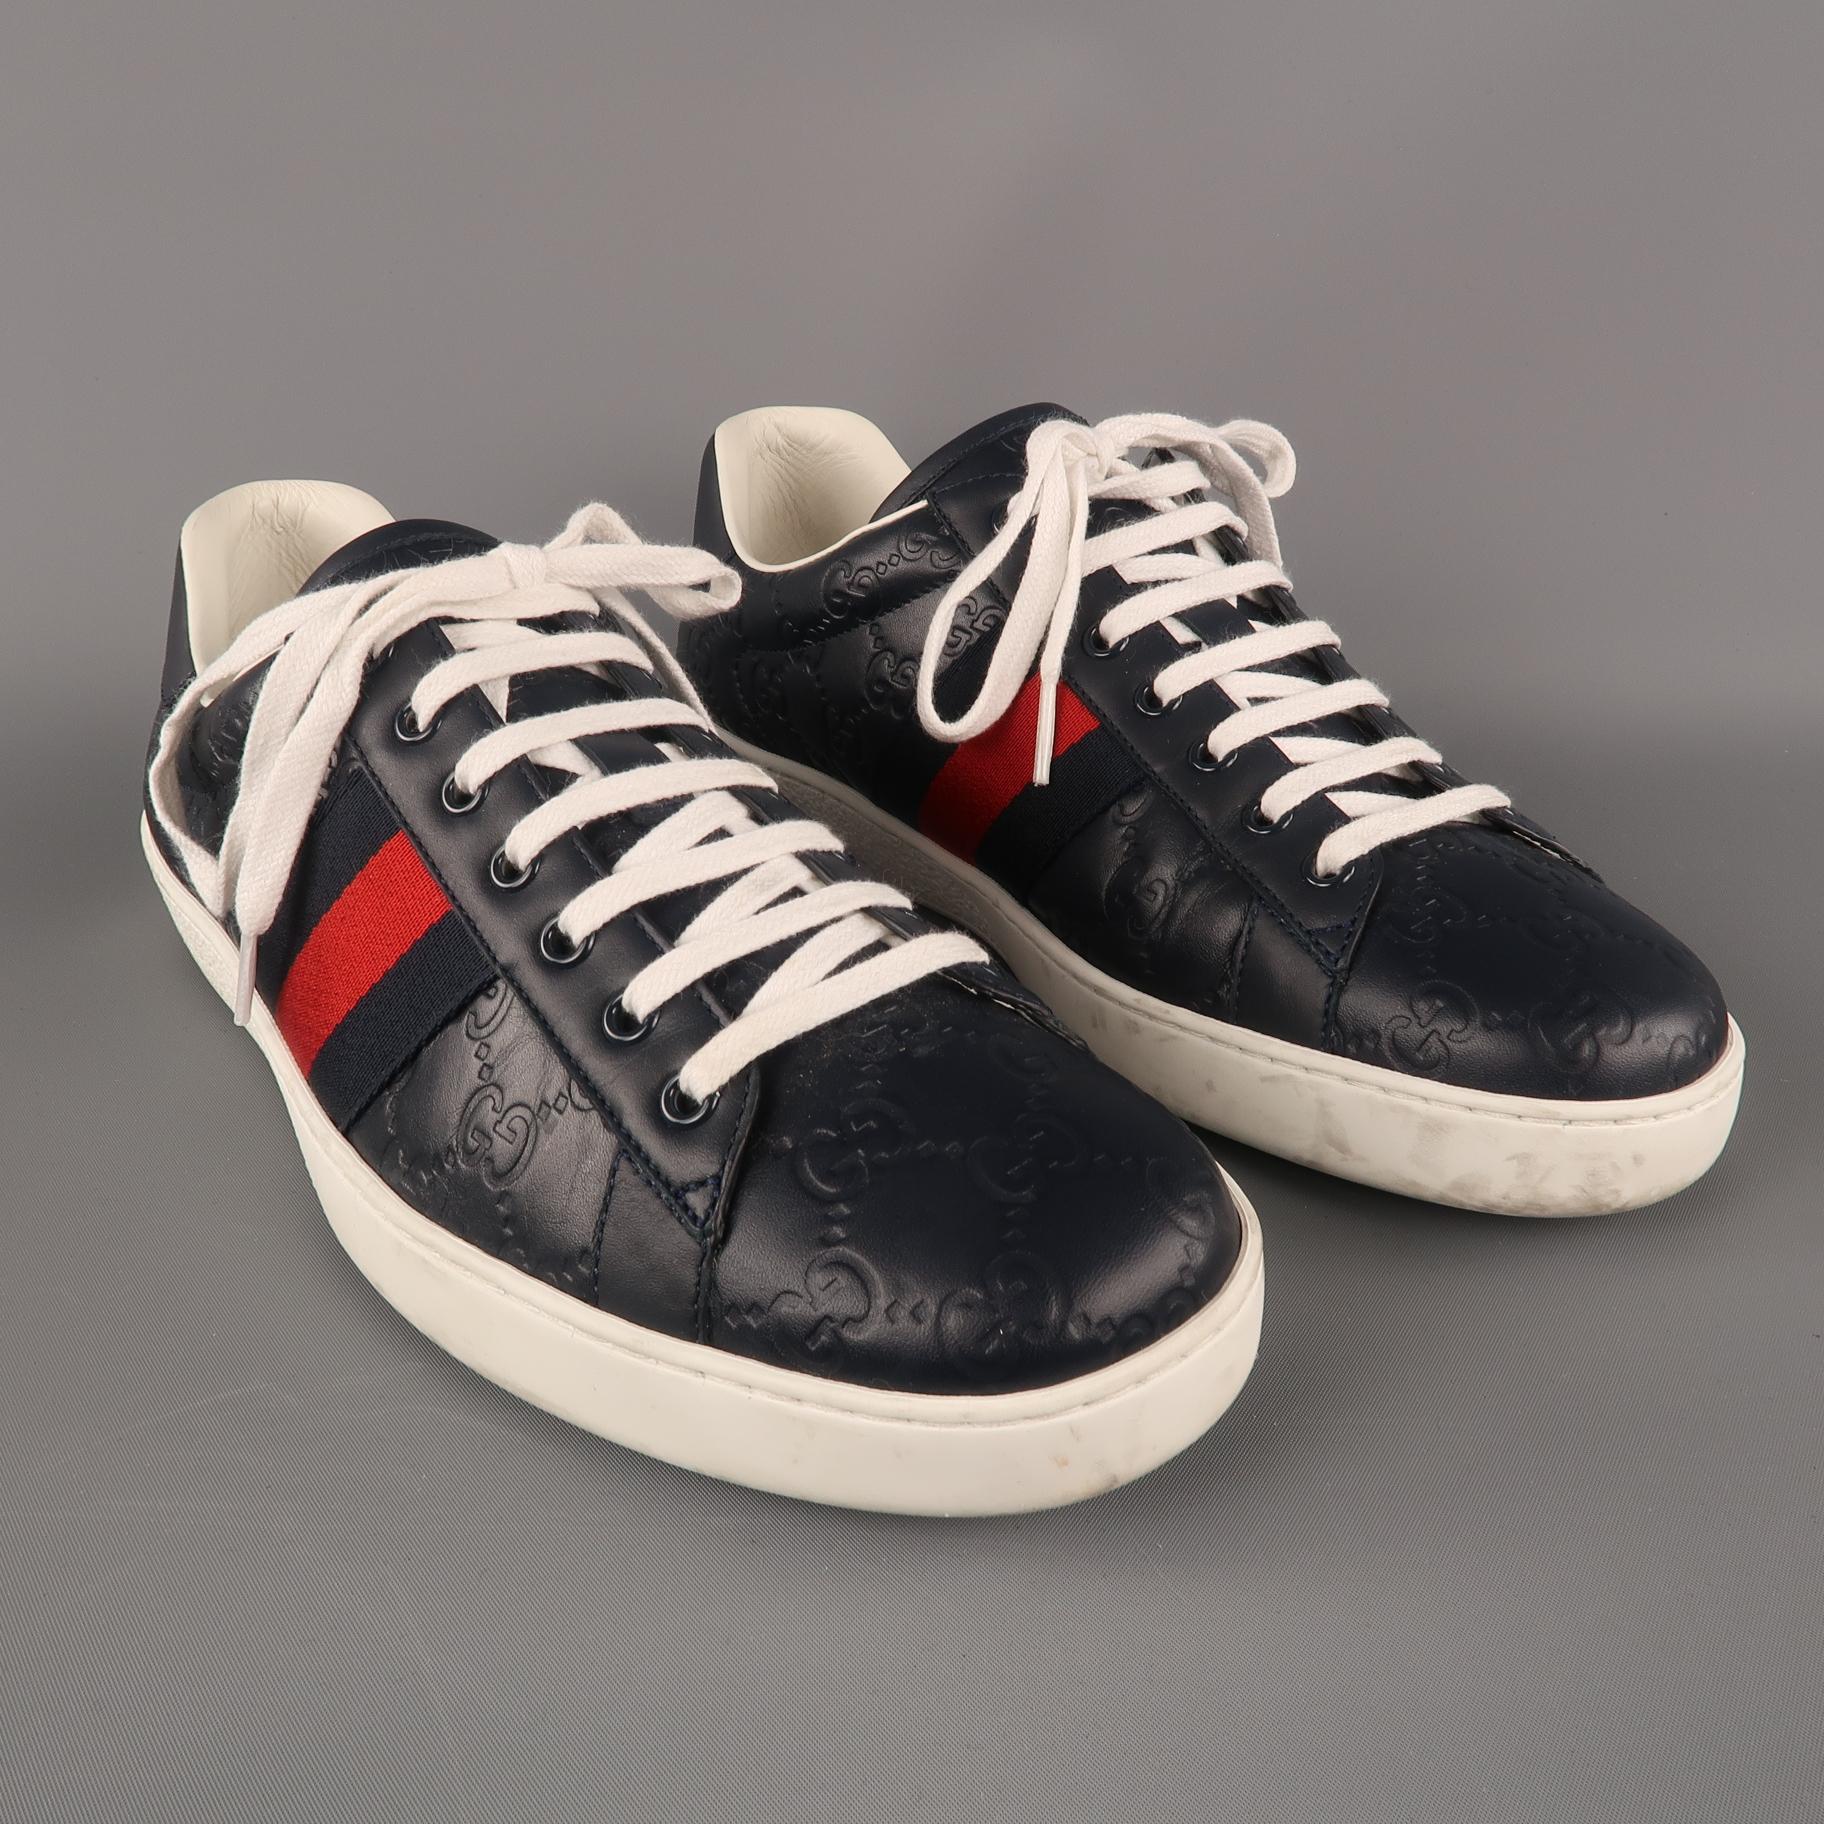 ACE GUCCI Signature Sneakers comes in a navy tone in a Guccissima embossed leather material, with a blue and red web, a white rubber sole, lace up. Made in Italy.
 
Excellent Pre-Owned Condition.
Marked: UK 10
 
Outsole: 12 x 4.5 in.